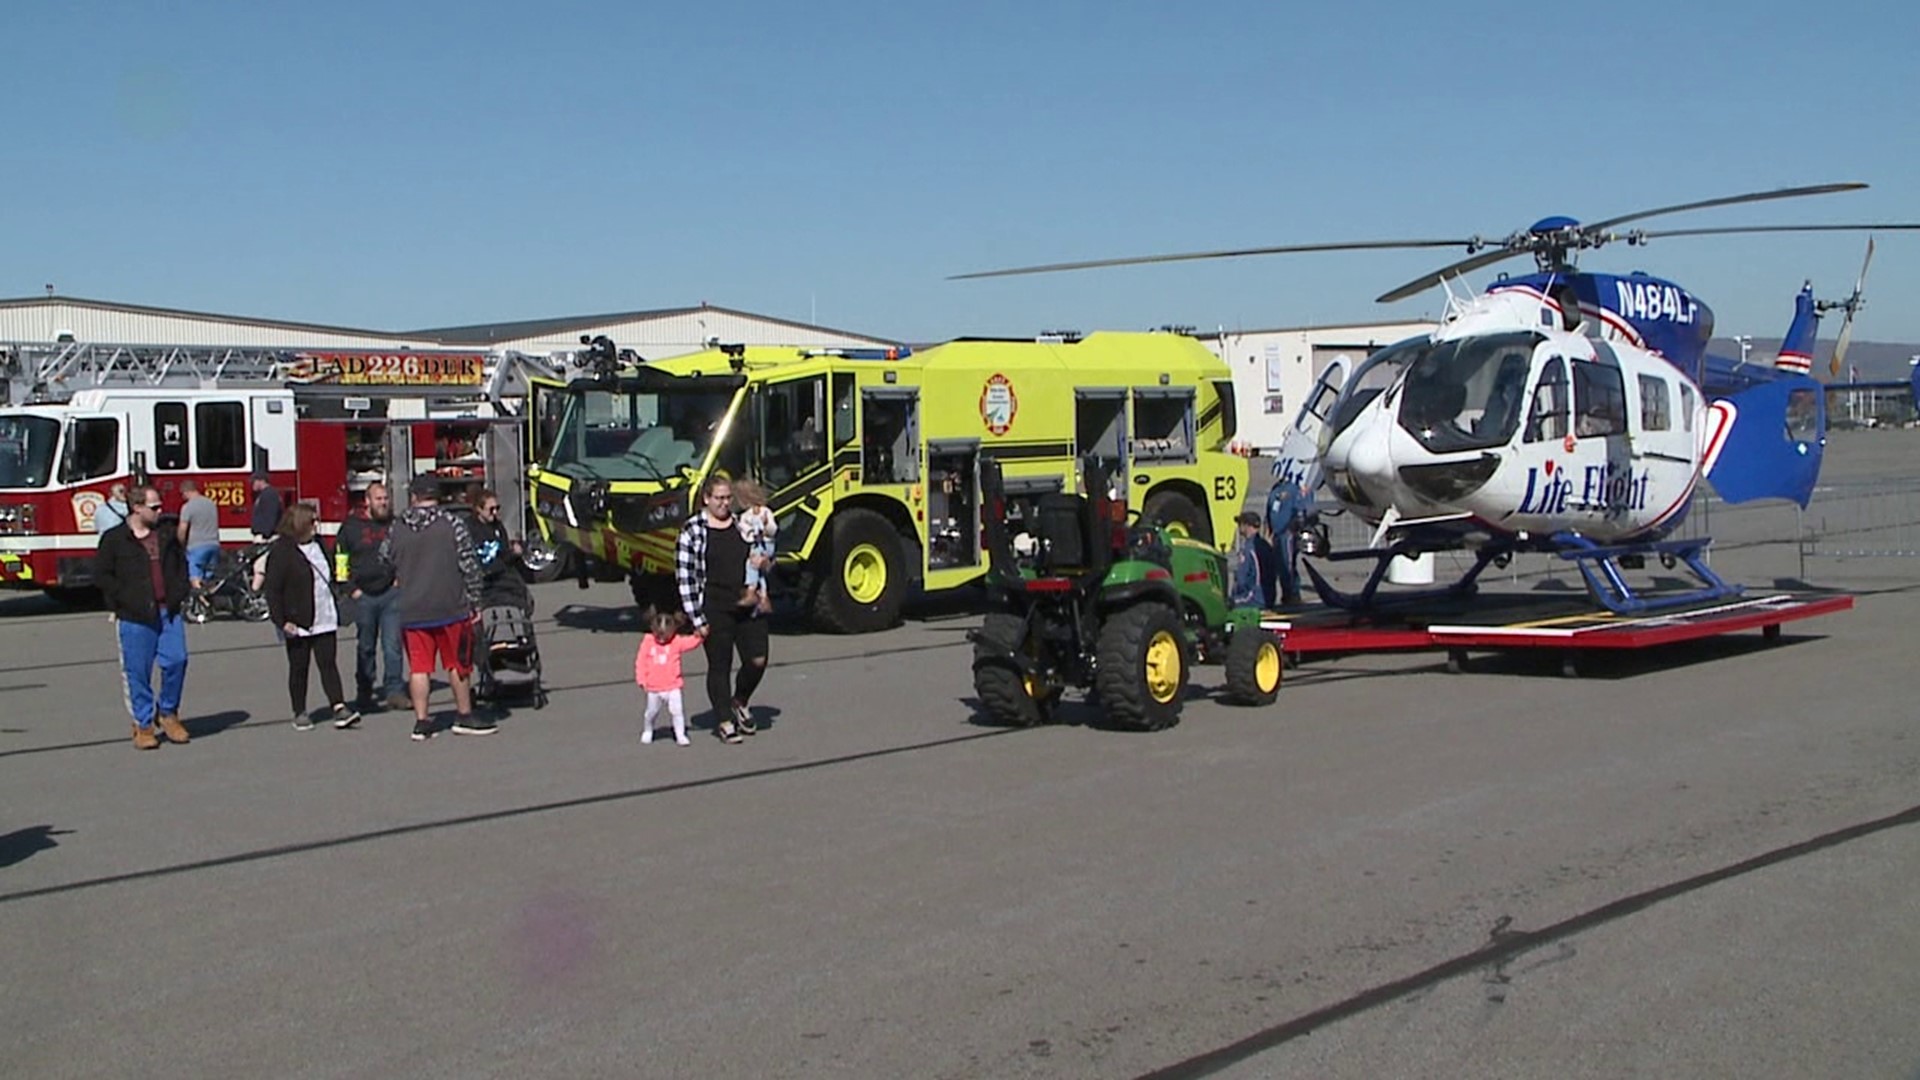 Children in Luzerne County got a first-hand look at all different types of emergency vehicles at an event Saturday at the Wilkes-Barre/Scranton International Airport